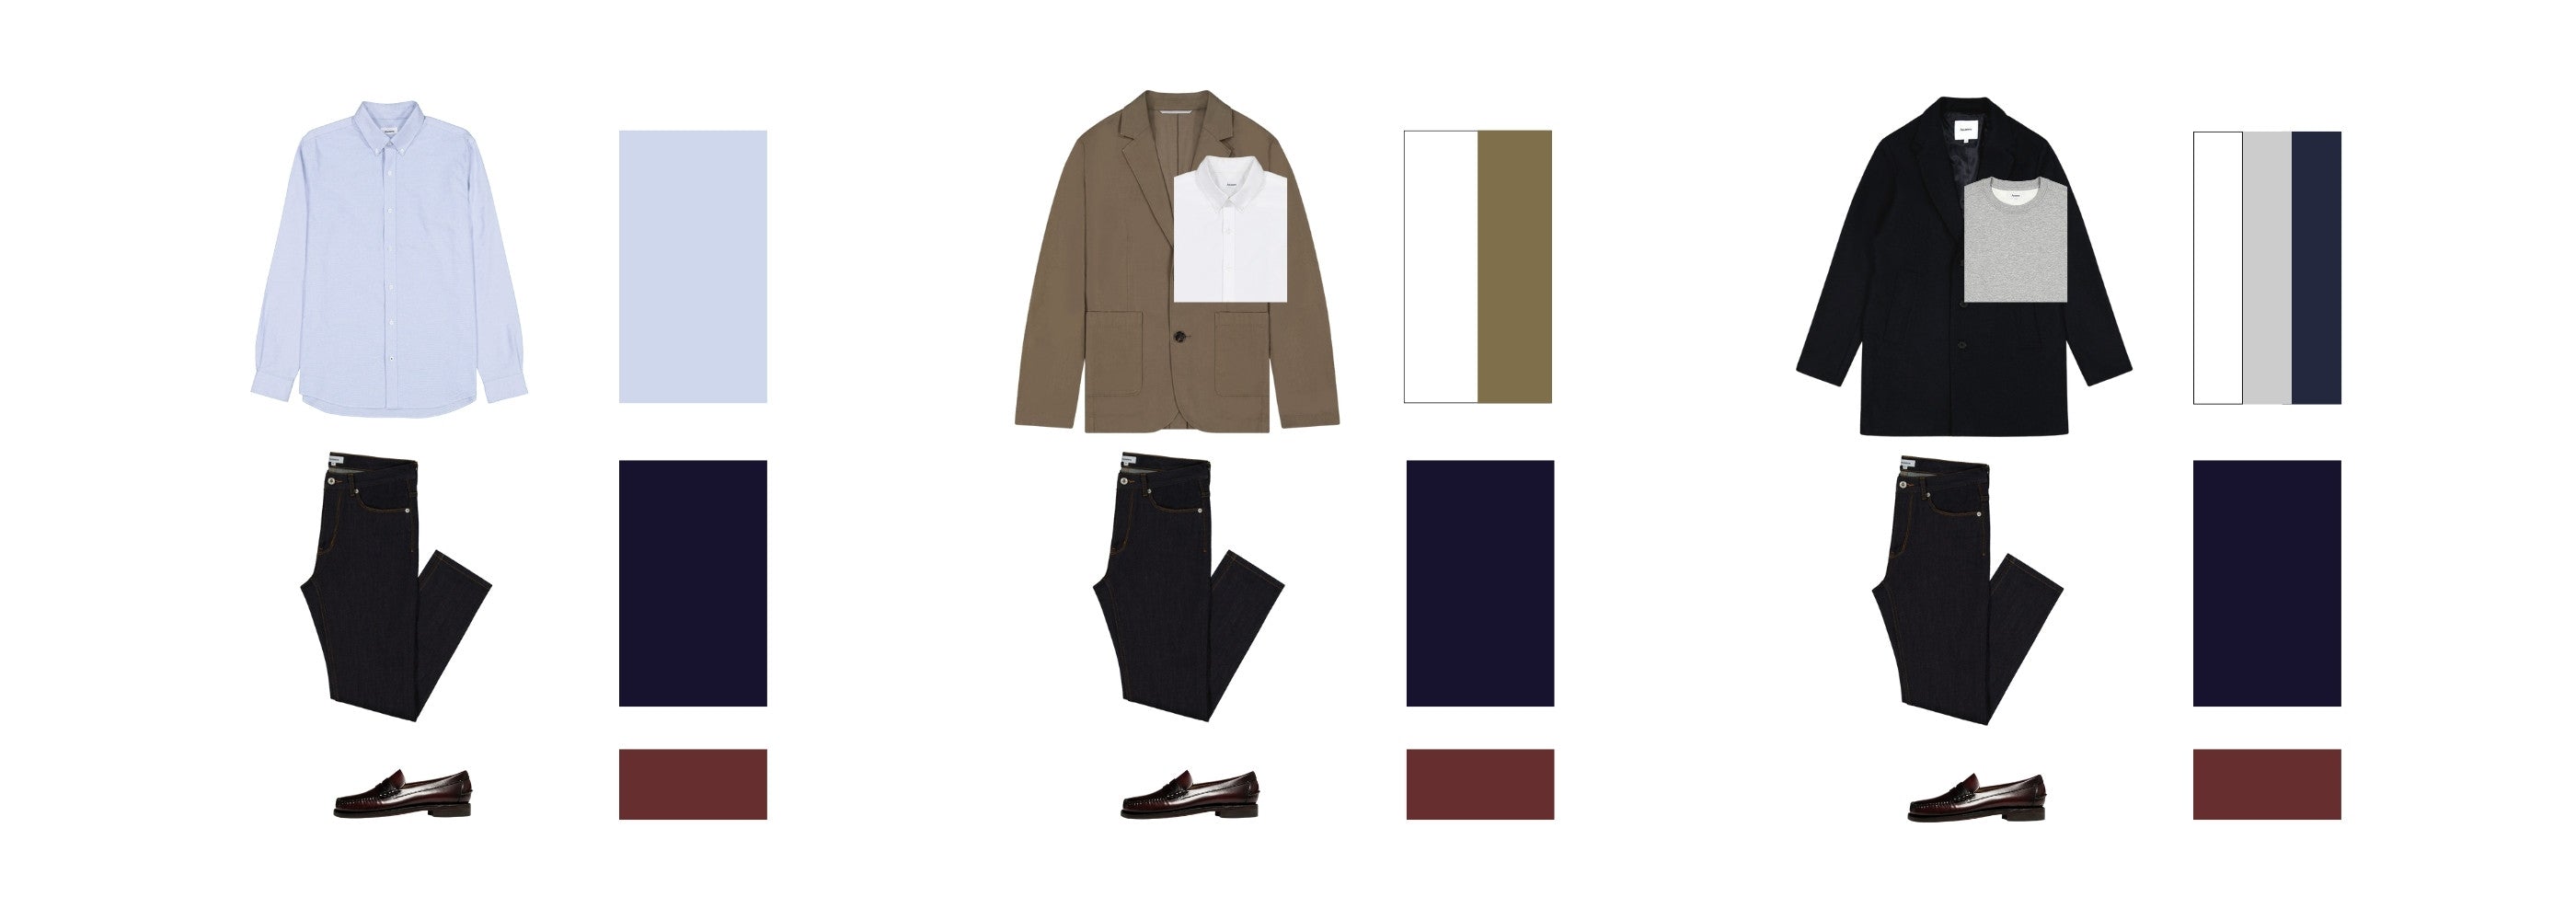 Foolproof Colour Combinations for Navy Jeans with a Burgundy Loafer/Dress Shoe